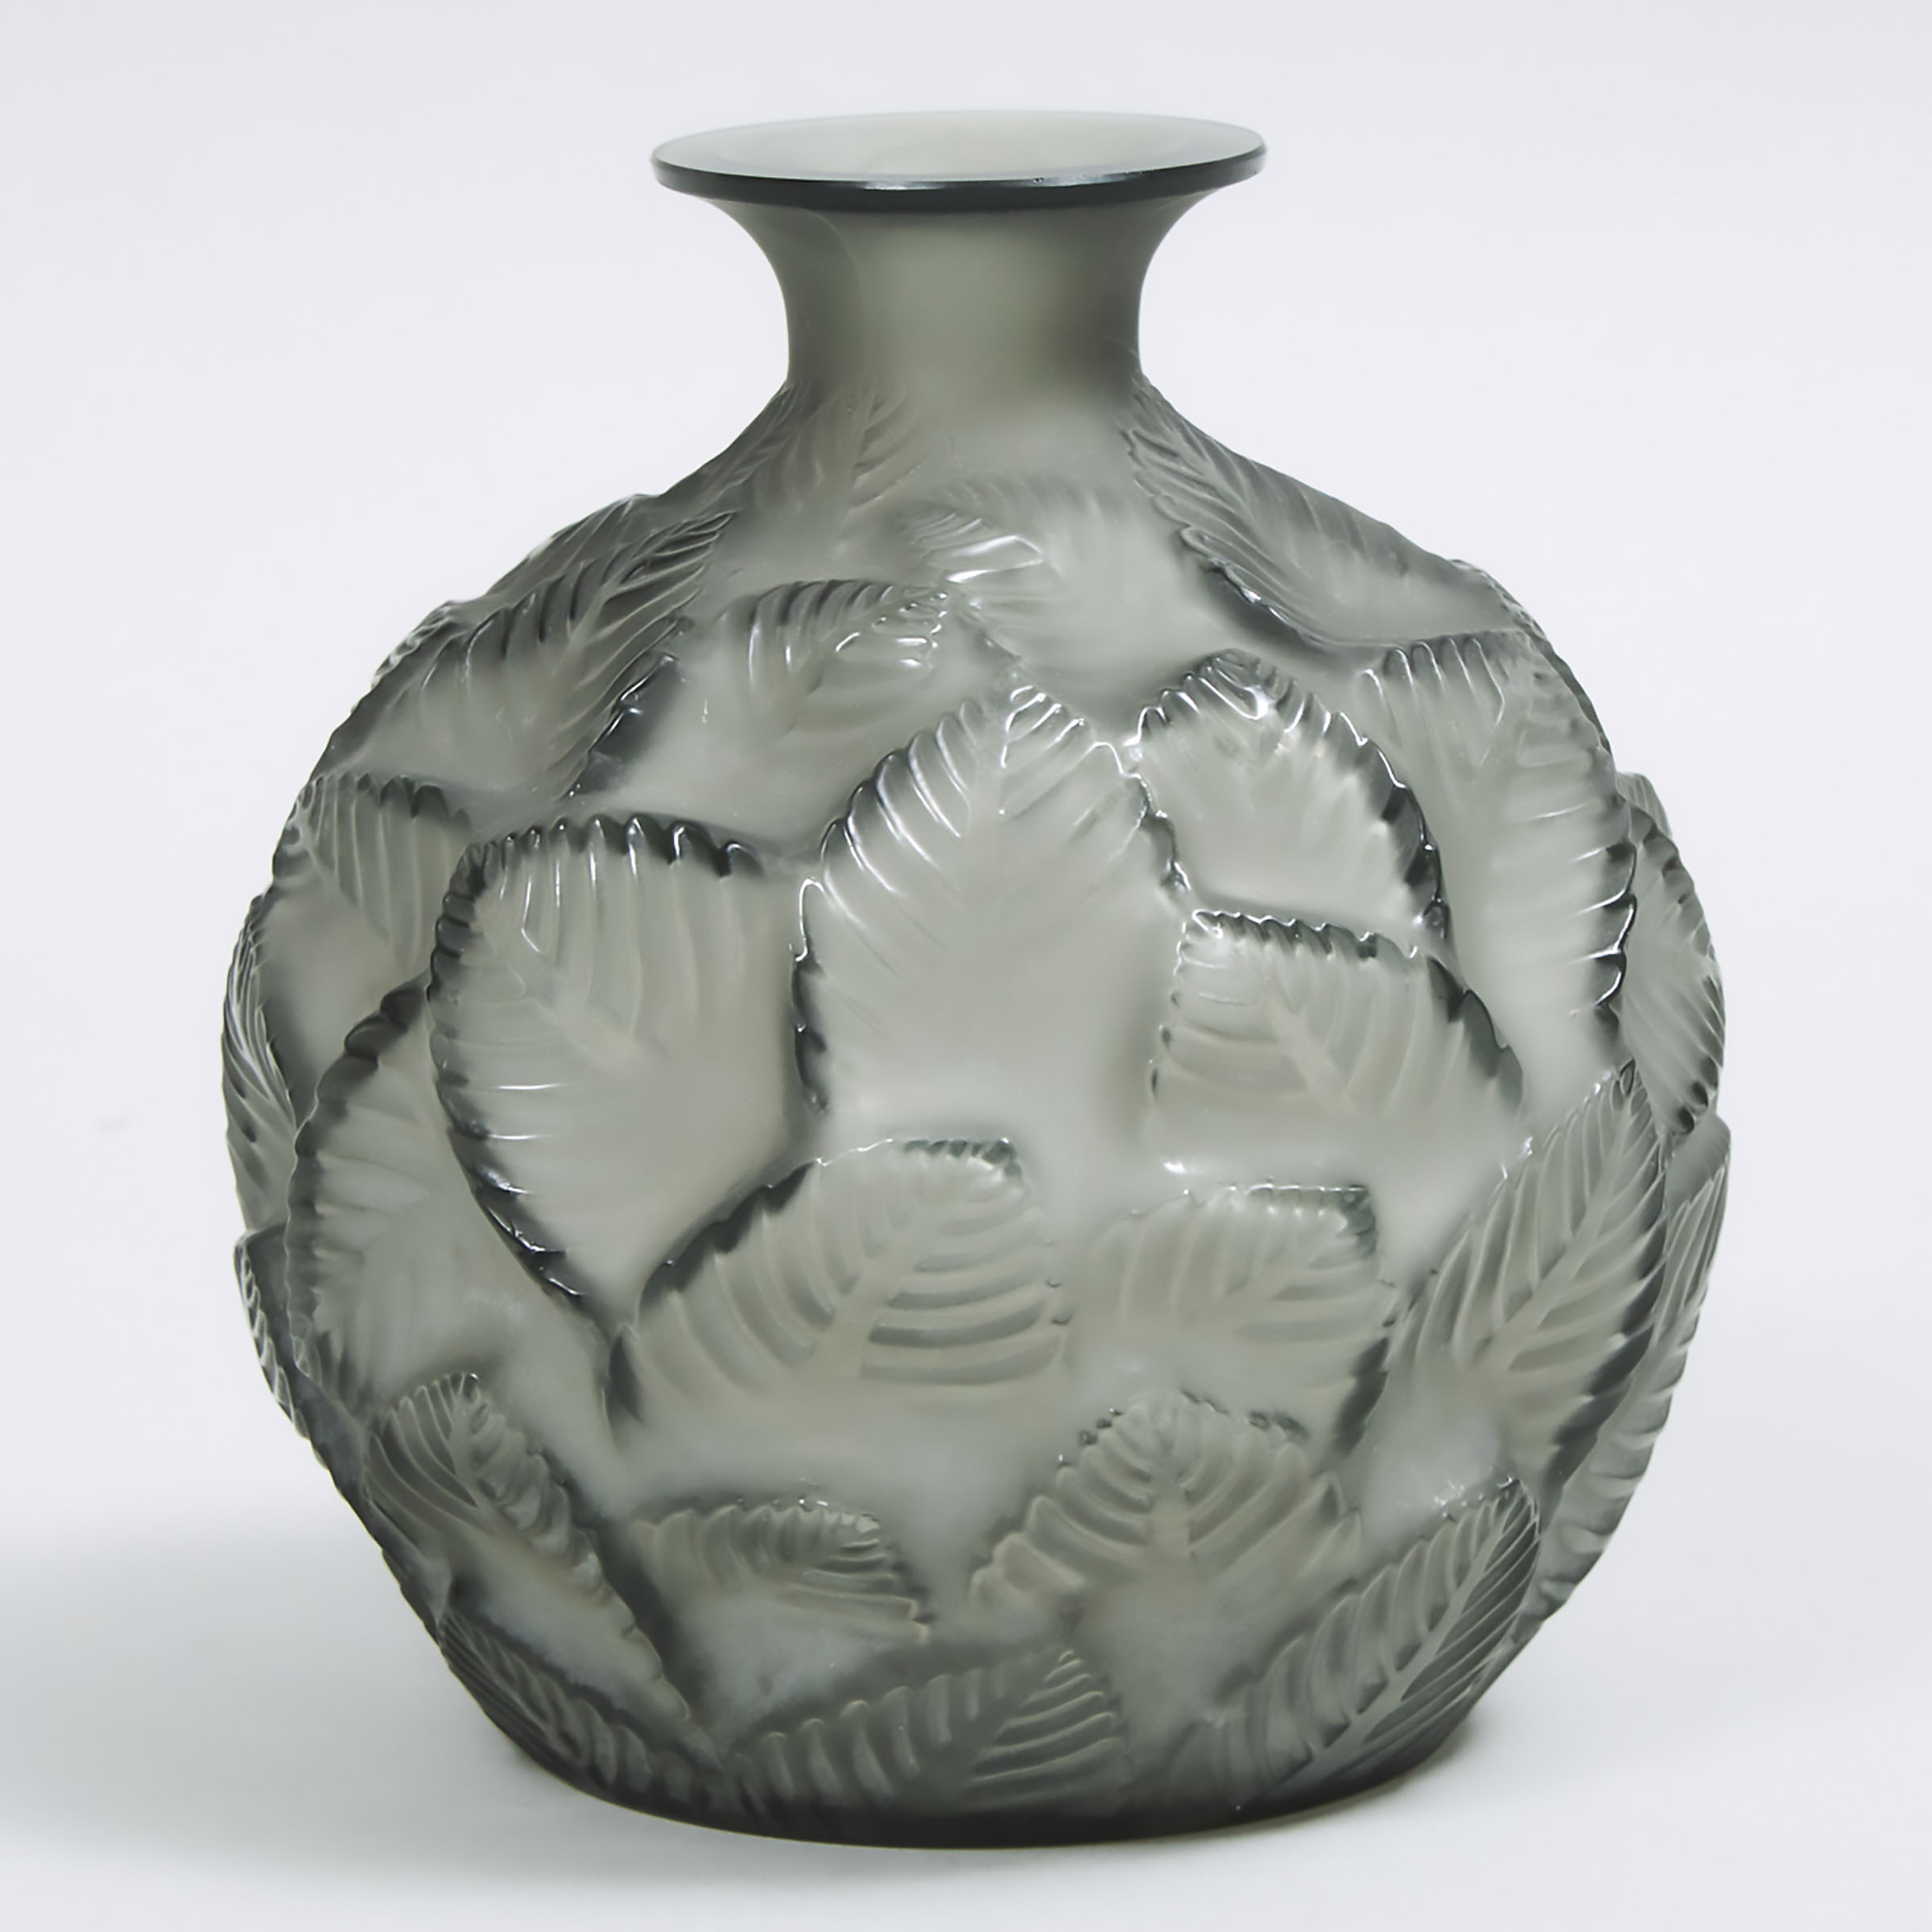 ‘Ormeaux’, Lalique Moulded and Frosted Grey Glass Vase, c.1930